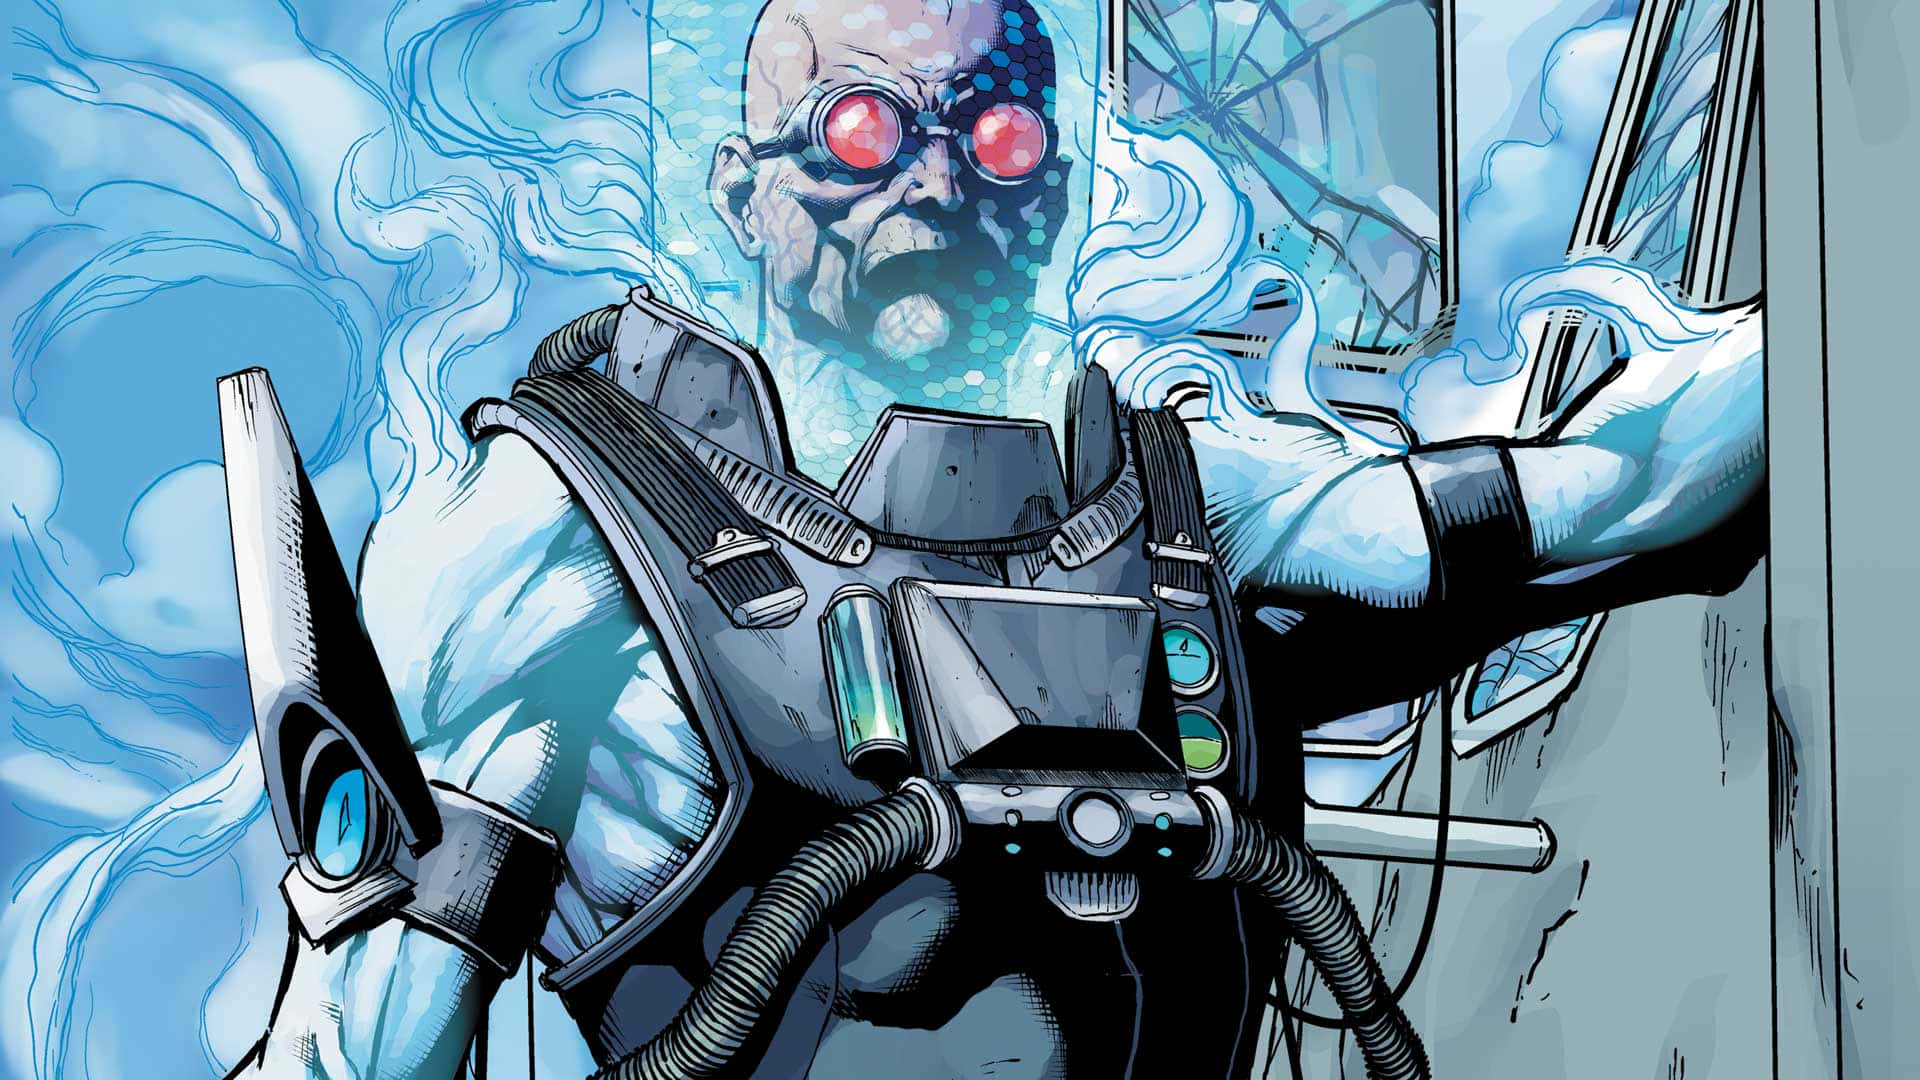 Mr. Freeze in an Icy Stance Wallpaper